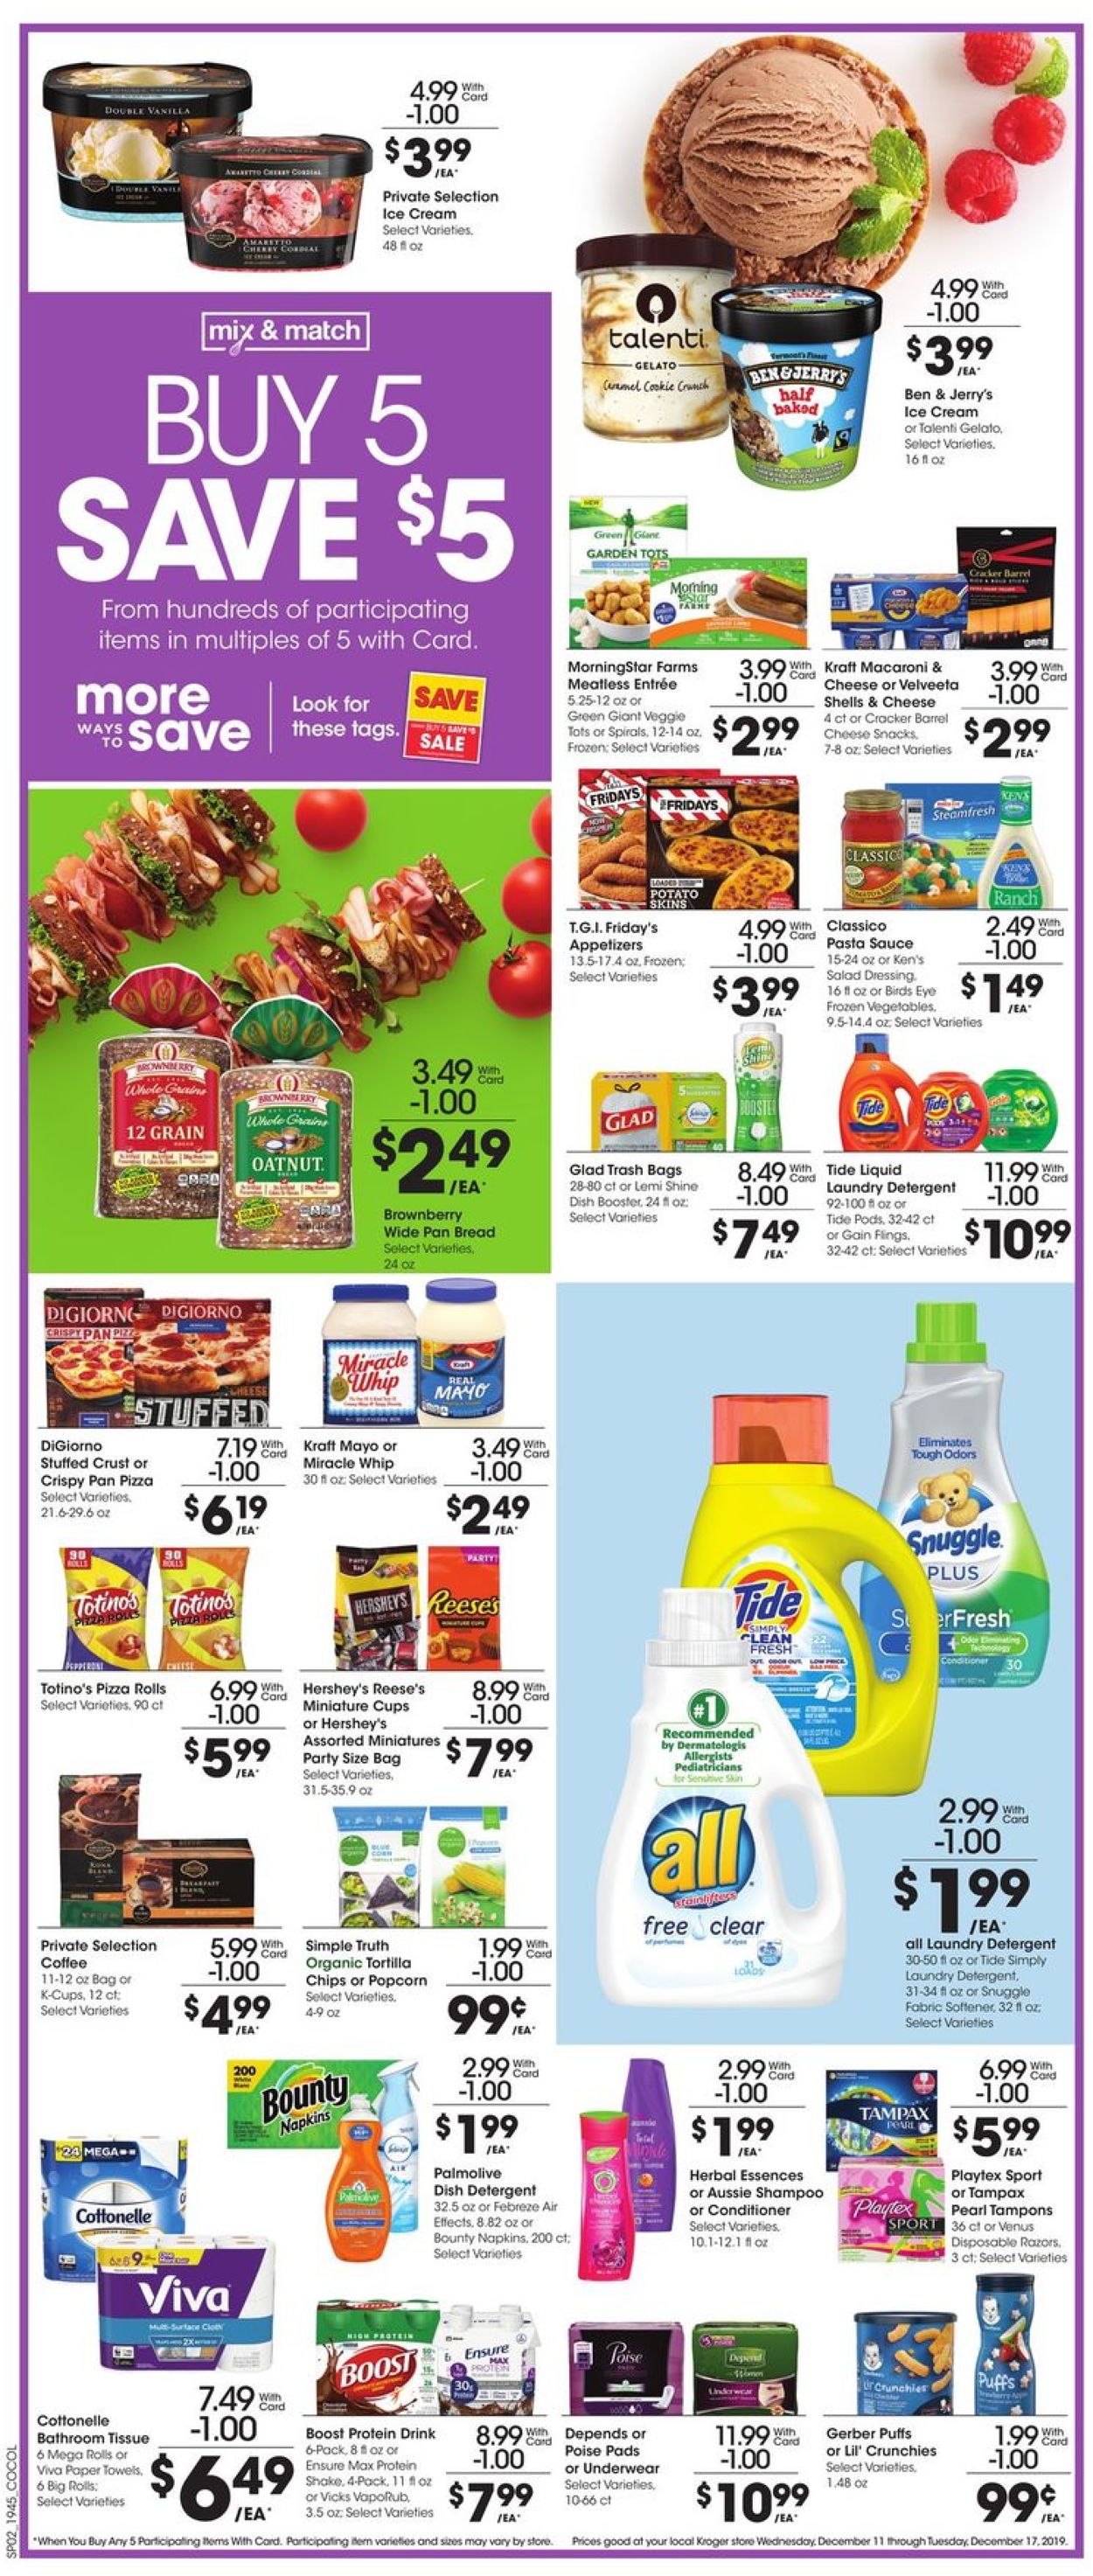 Kroger - Holiday Ad 2019 Current weekly ad 12/11 - 12/17/2019 3 - frequent-ads.com